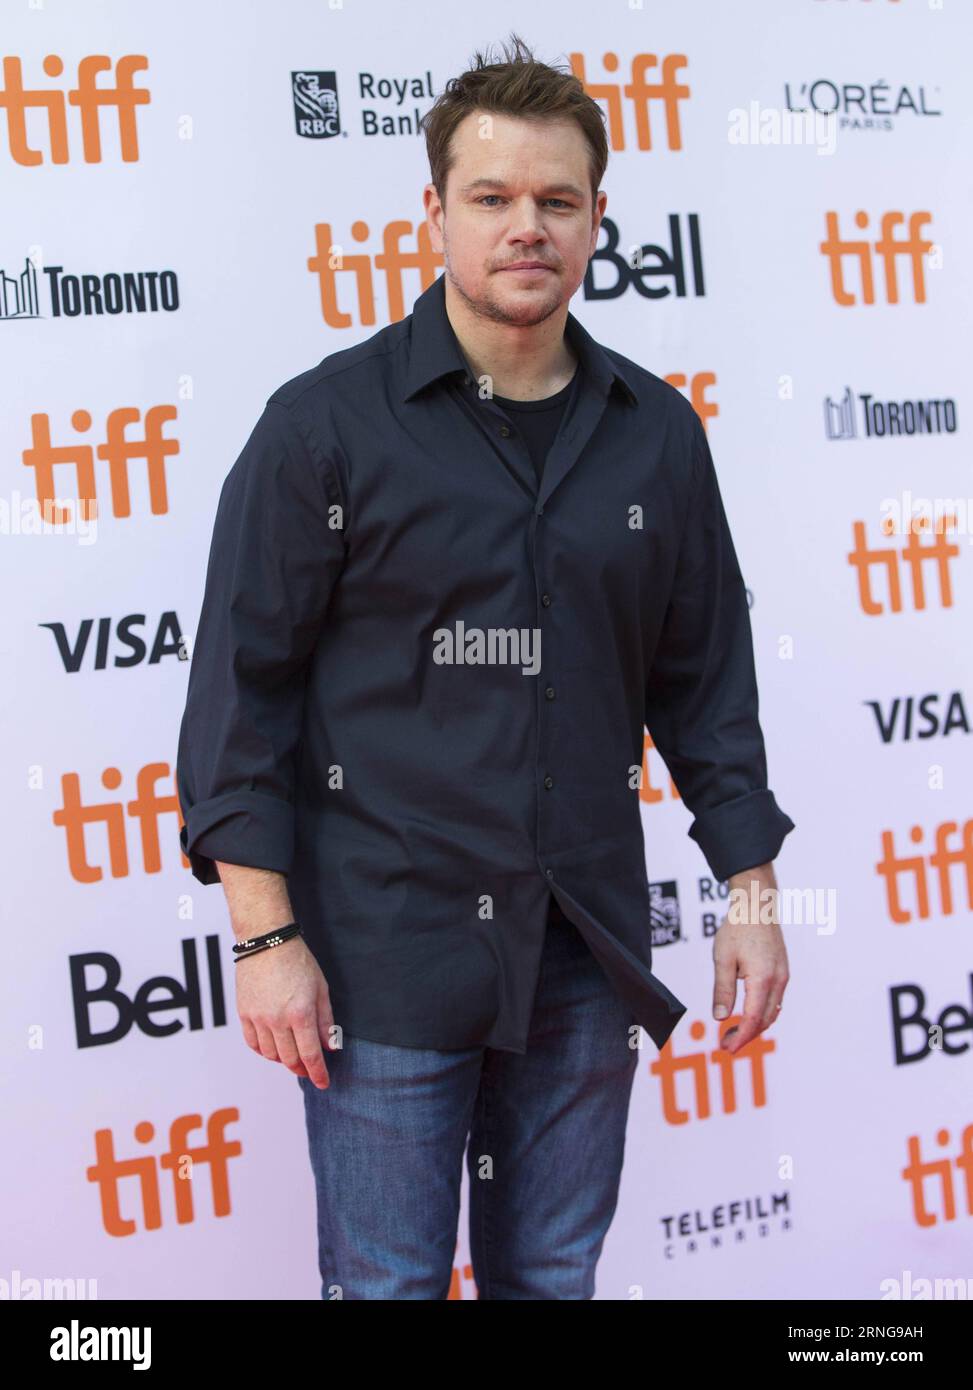 (160914) -- TORONTO, Sept. 13, 2016 -- Producer Matt Damon poses for photos before the international premiere of the film Manchester by the Sea at the Princess of Wales Theater during the 41st Toronto International Film Festival in Toronto, Canada, Sept. 13, 2016. ) (lrz) CANADA-TORONTO-FILM FESTIVAL- MANCHESTER BY THE SEA ZouxZheng PUBLICATIONxNOTxINxCHN   160914 Toronto Sept 13 2016 Producer Matt Damon Poses for Photos Before The International Premiere of The Film Manchester by The Sea AT The Princess of Wales Theatre during The 41st Toronto International Film Festival in Toronto Canada Sept Stock Photo